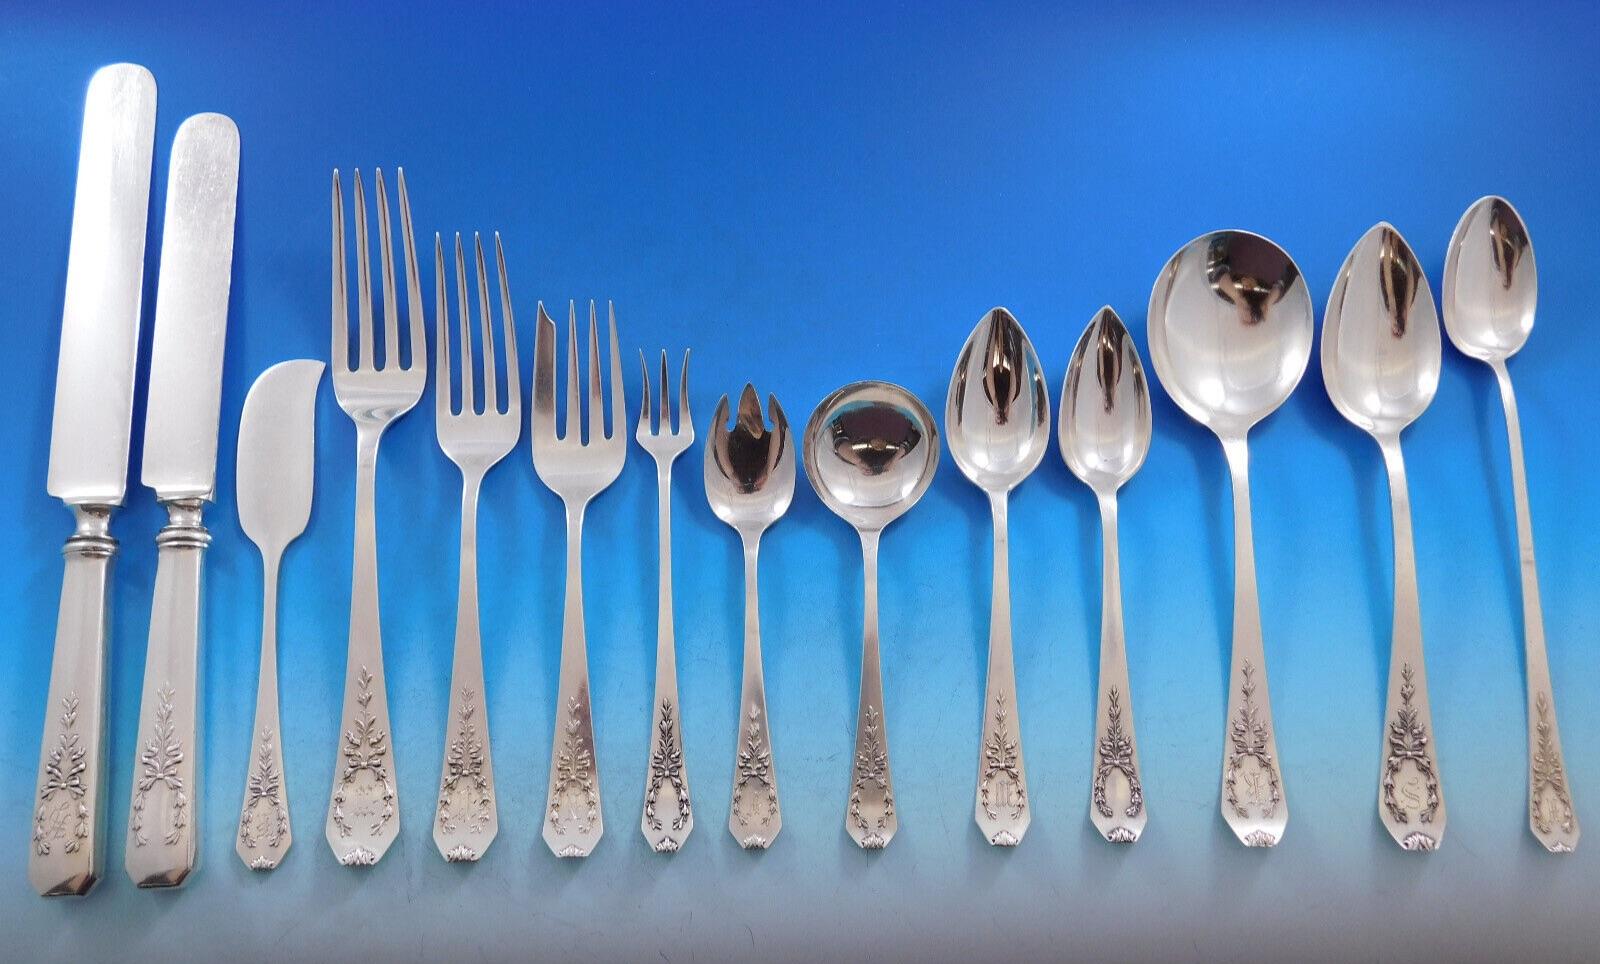 Monumental dinner and regular size Madam Jumel by Whiting sterling silver Flatware set, 190 pieces. This set includes:

12 Dinner Knives w/blunt plated blades, 9 3/4